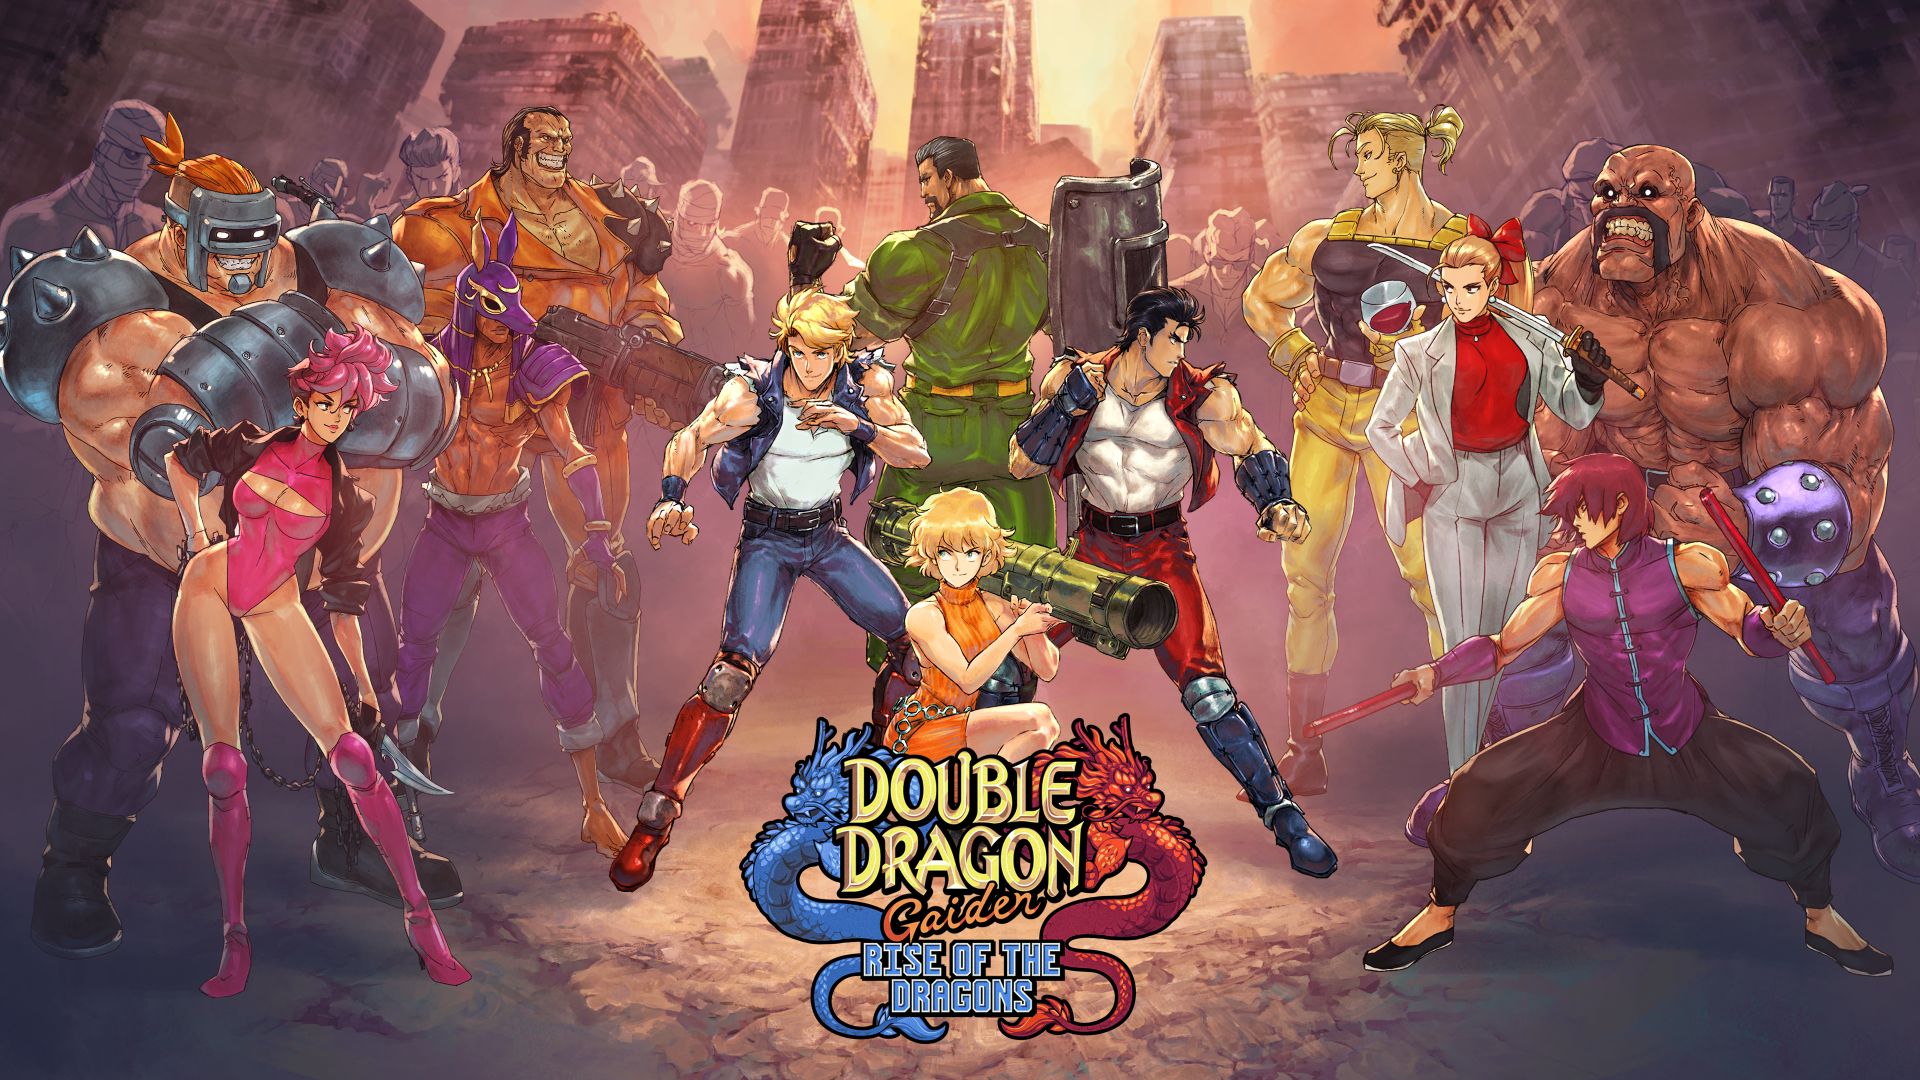 Double Dragon Gaiden : Rise of the Dragon Review 